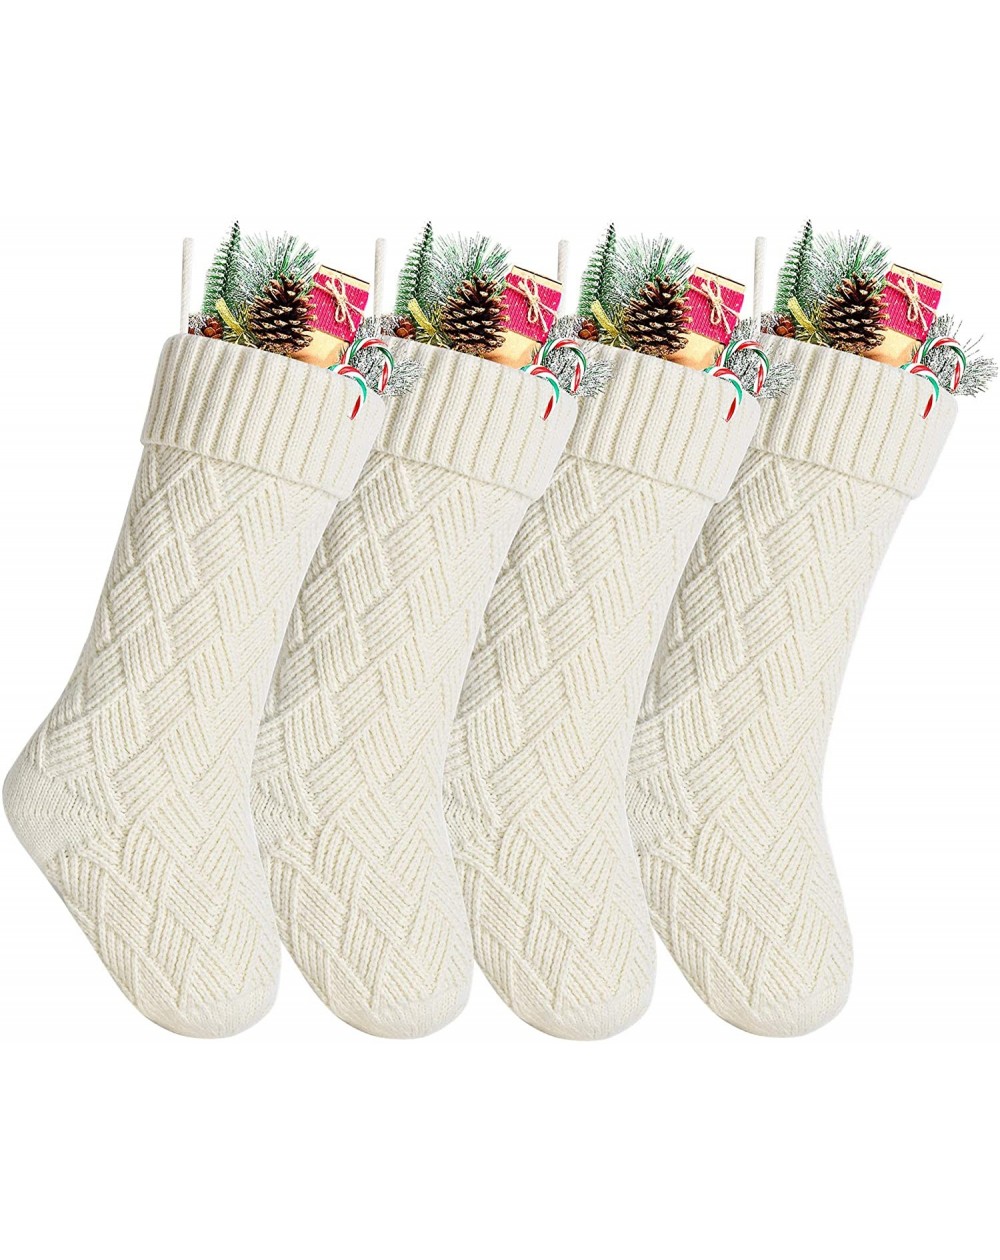 Stockings & Holders Pack 4-18" Unique Ivory Cream Knit Christmas Stockings for Holiday Decor - Ivory - C718AG995YX $32.61